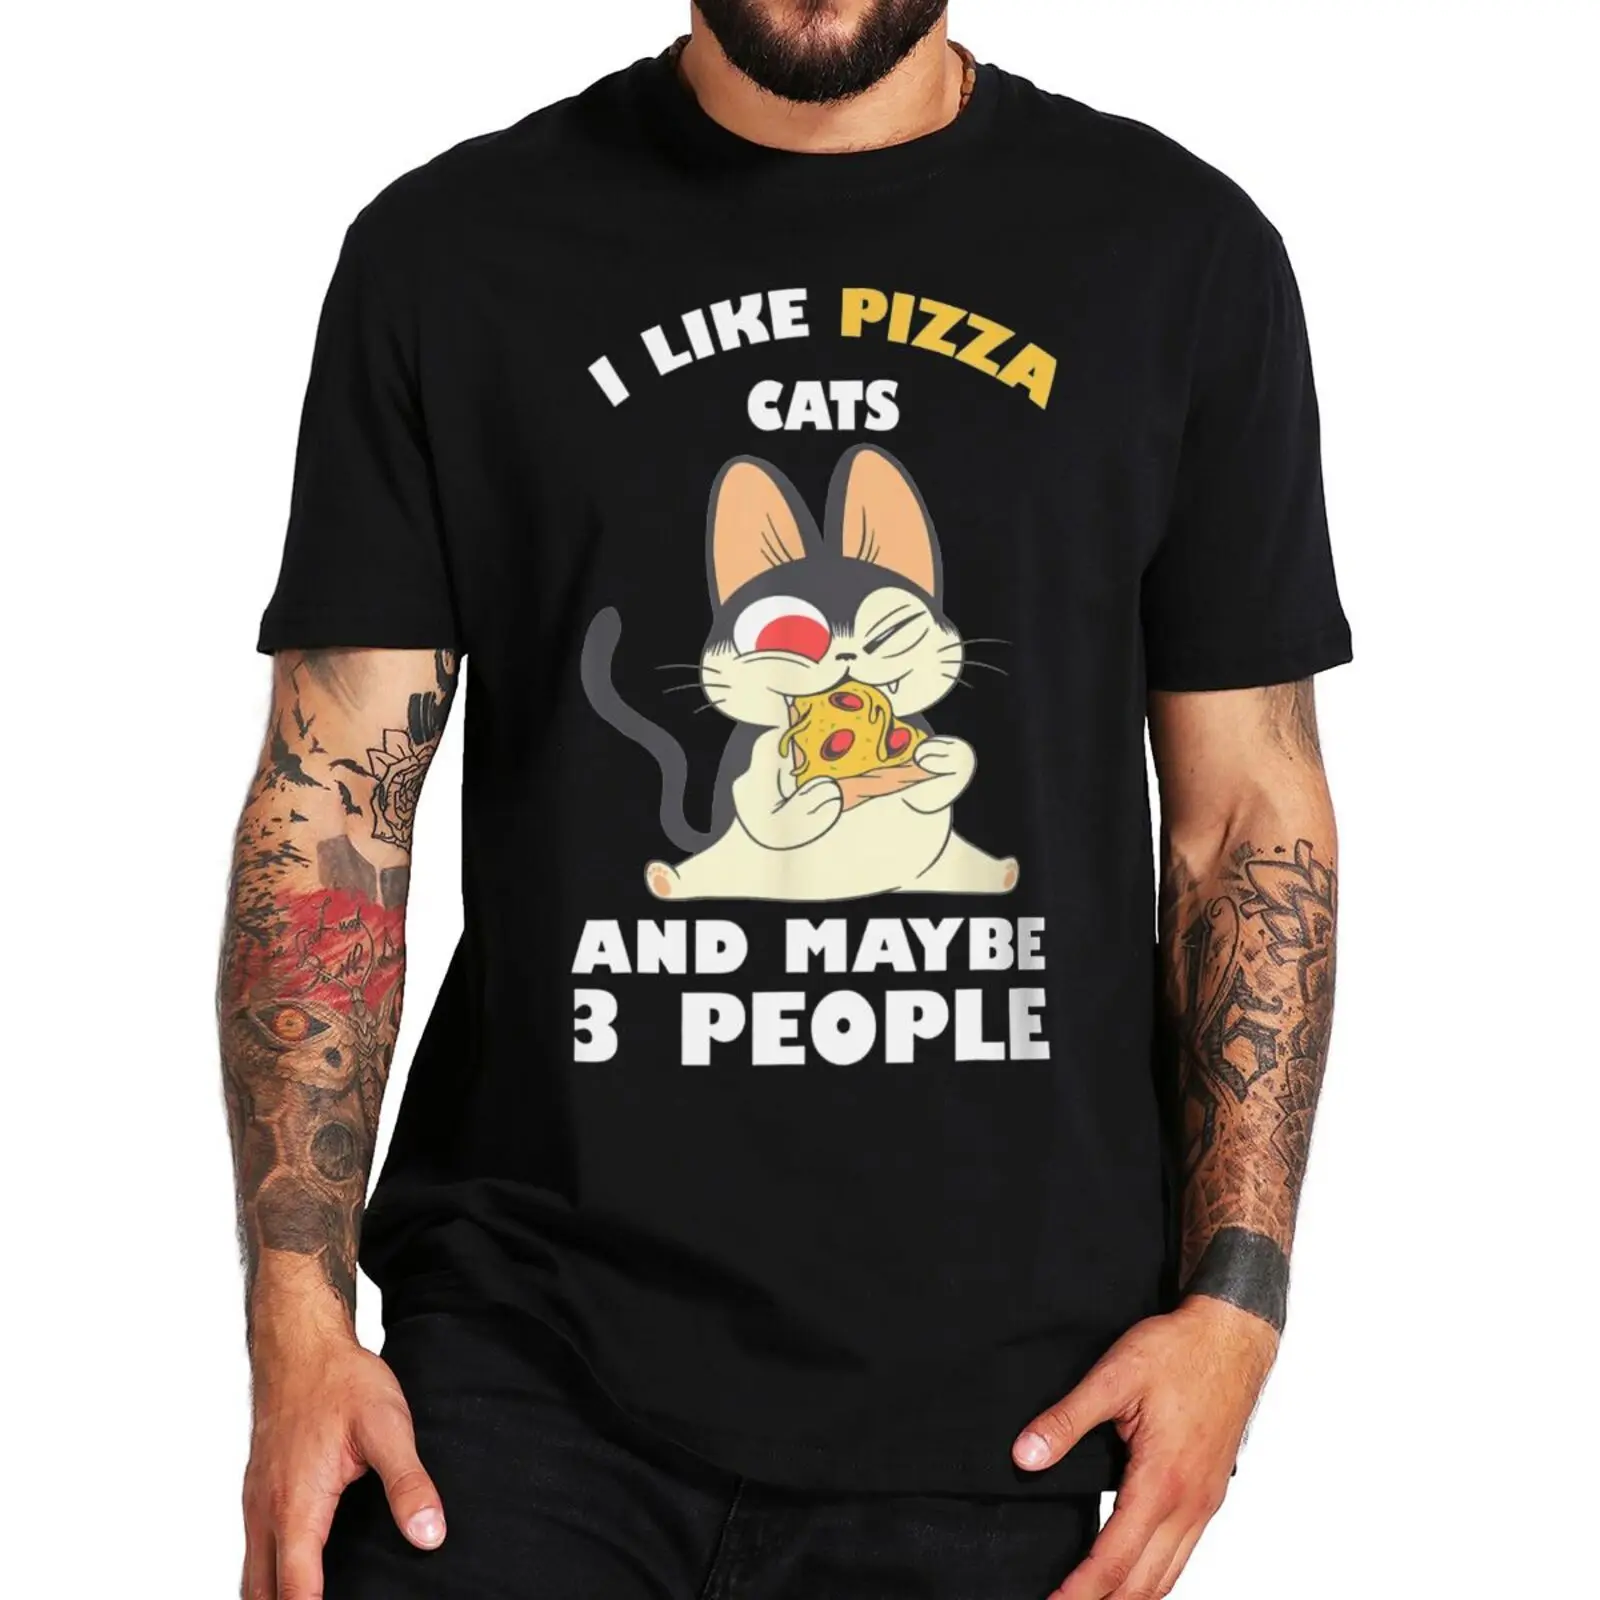 

I Like Pizza Cat And Maybe 3 People T-shirt Funny Cat Pizza Lovers Short Sleeve Cotton Summer Casual Oversized Unisex T Shirt